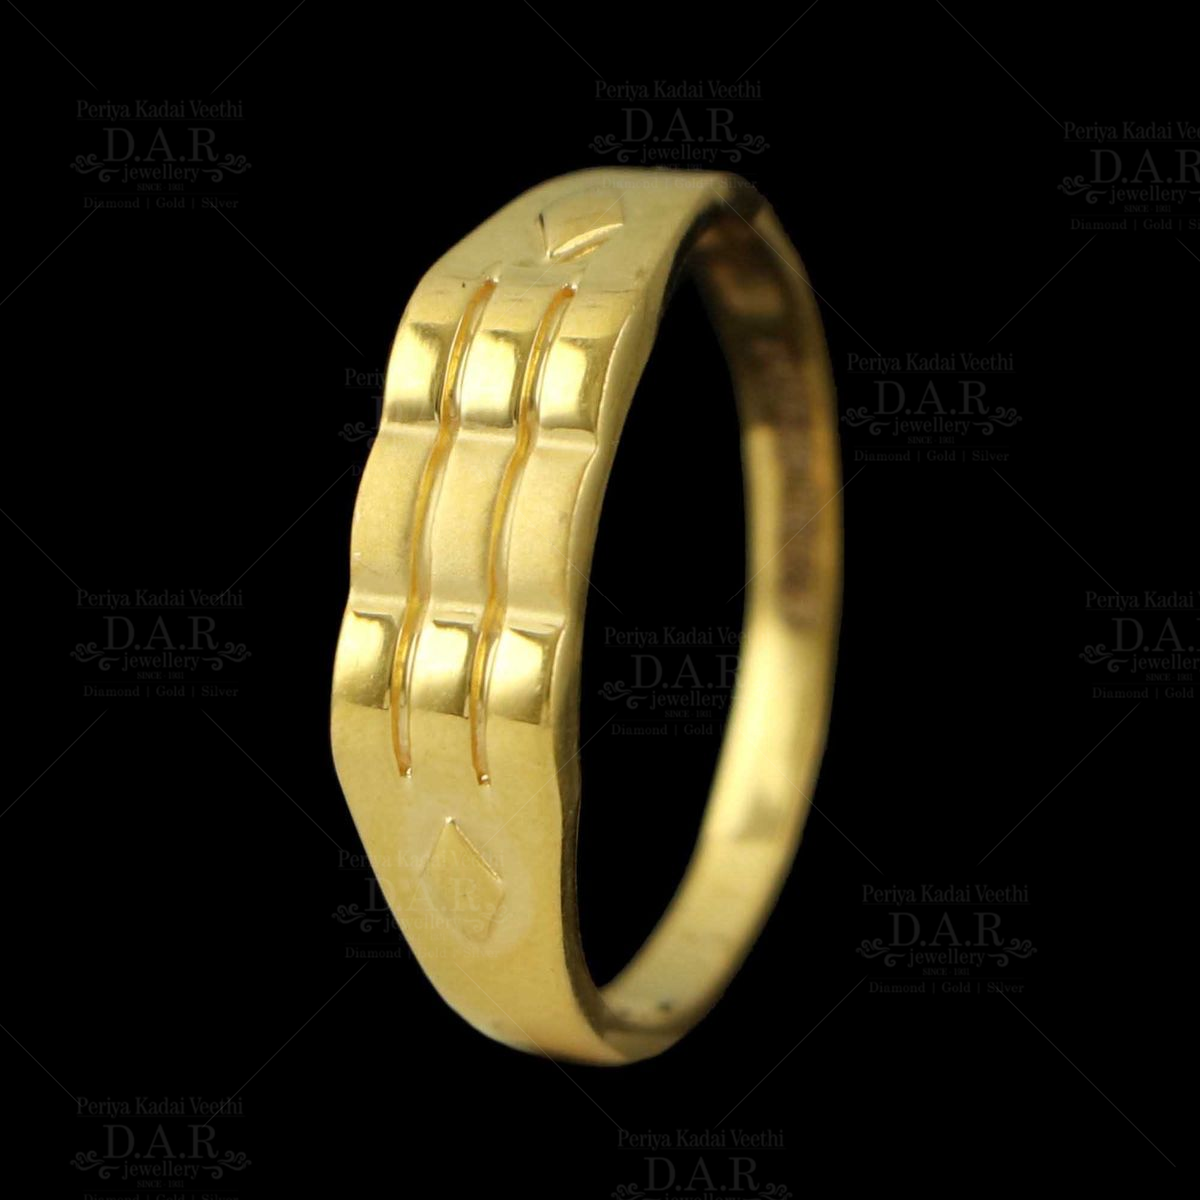 22 Karat Gold Ring For Mens - RiMs26314 - 22K Gold ring for men's is  designed with machine cuts and matte finish.